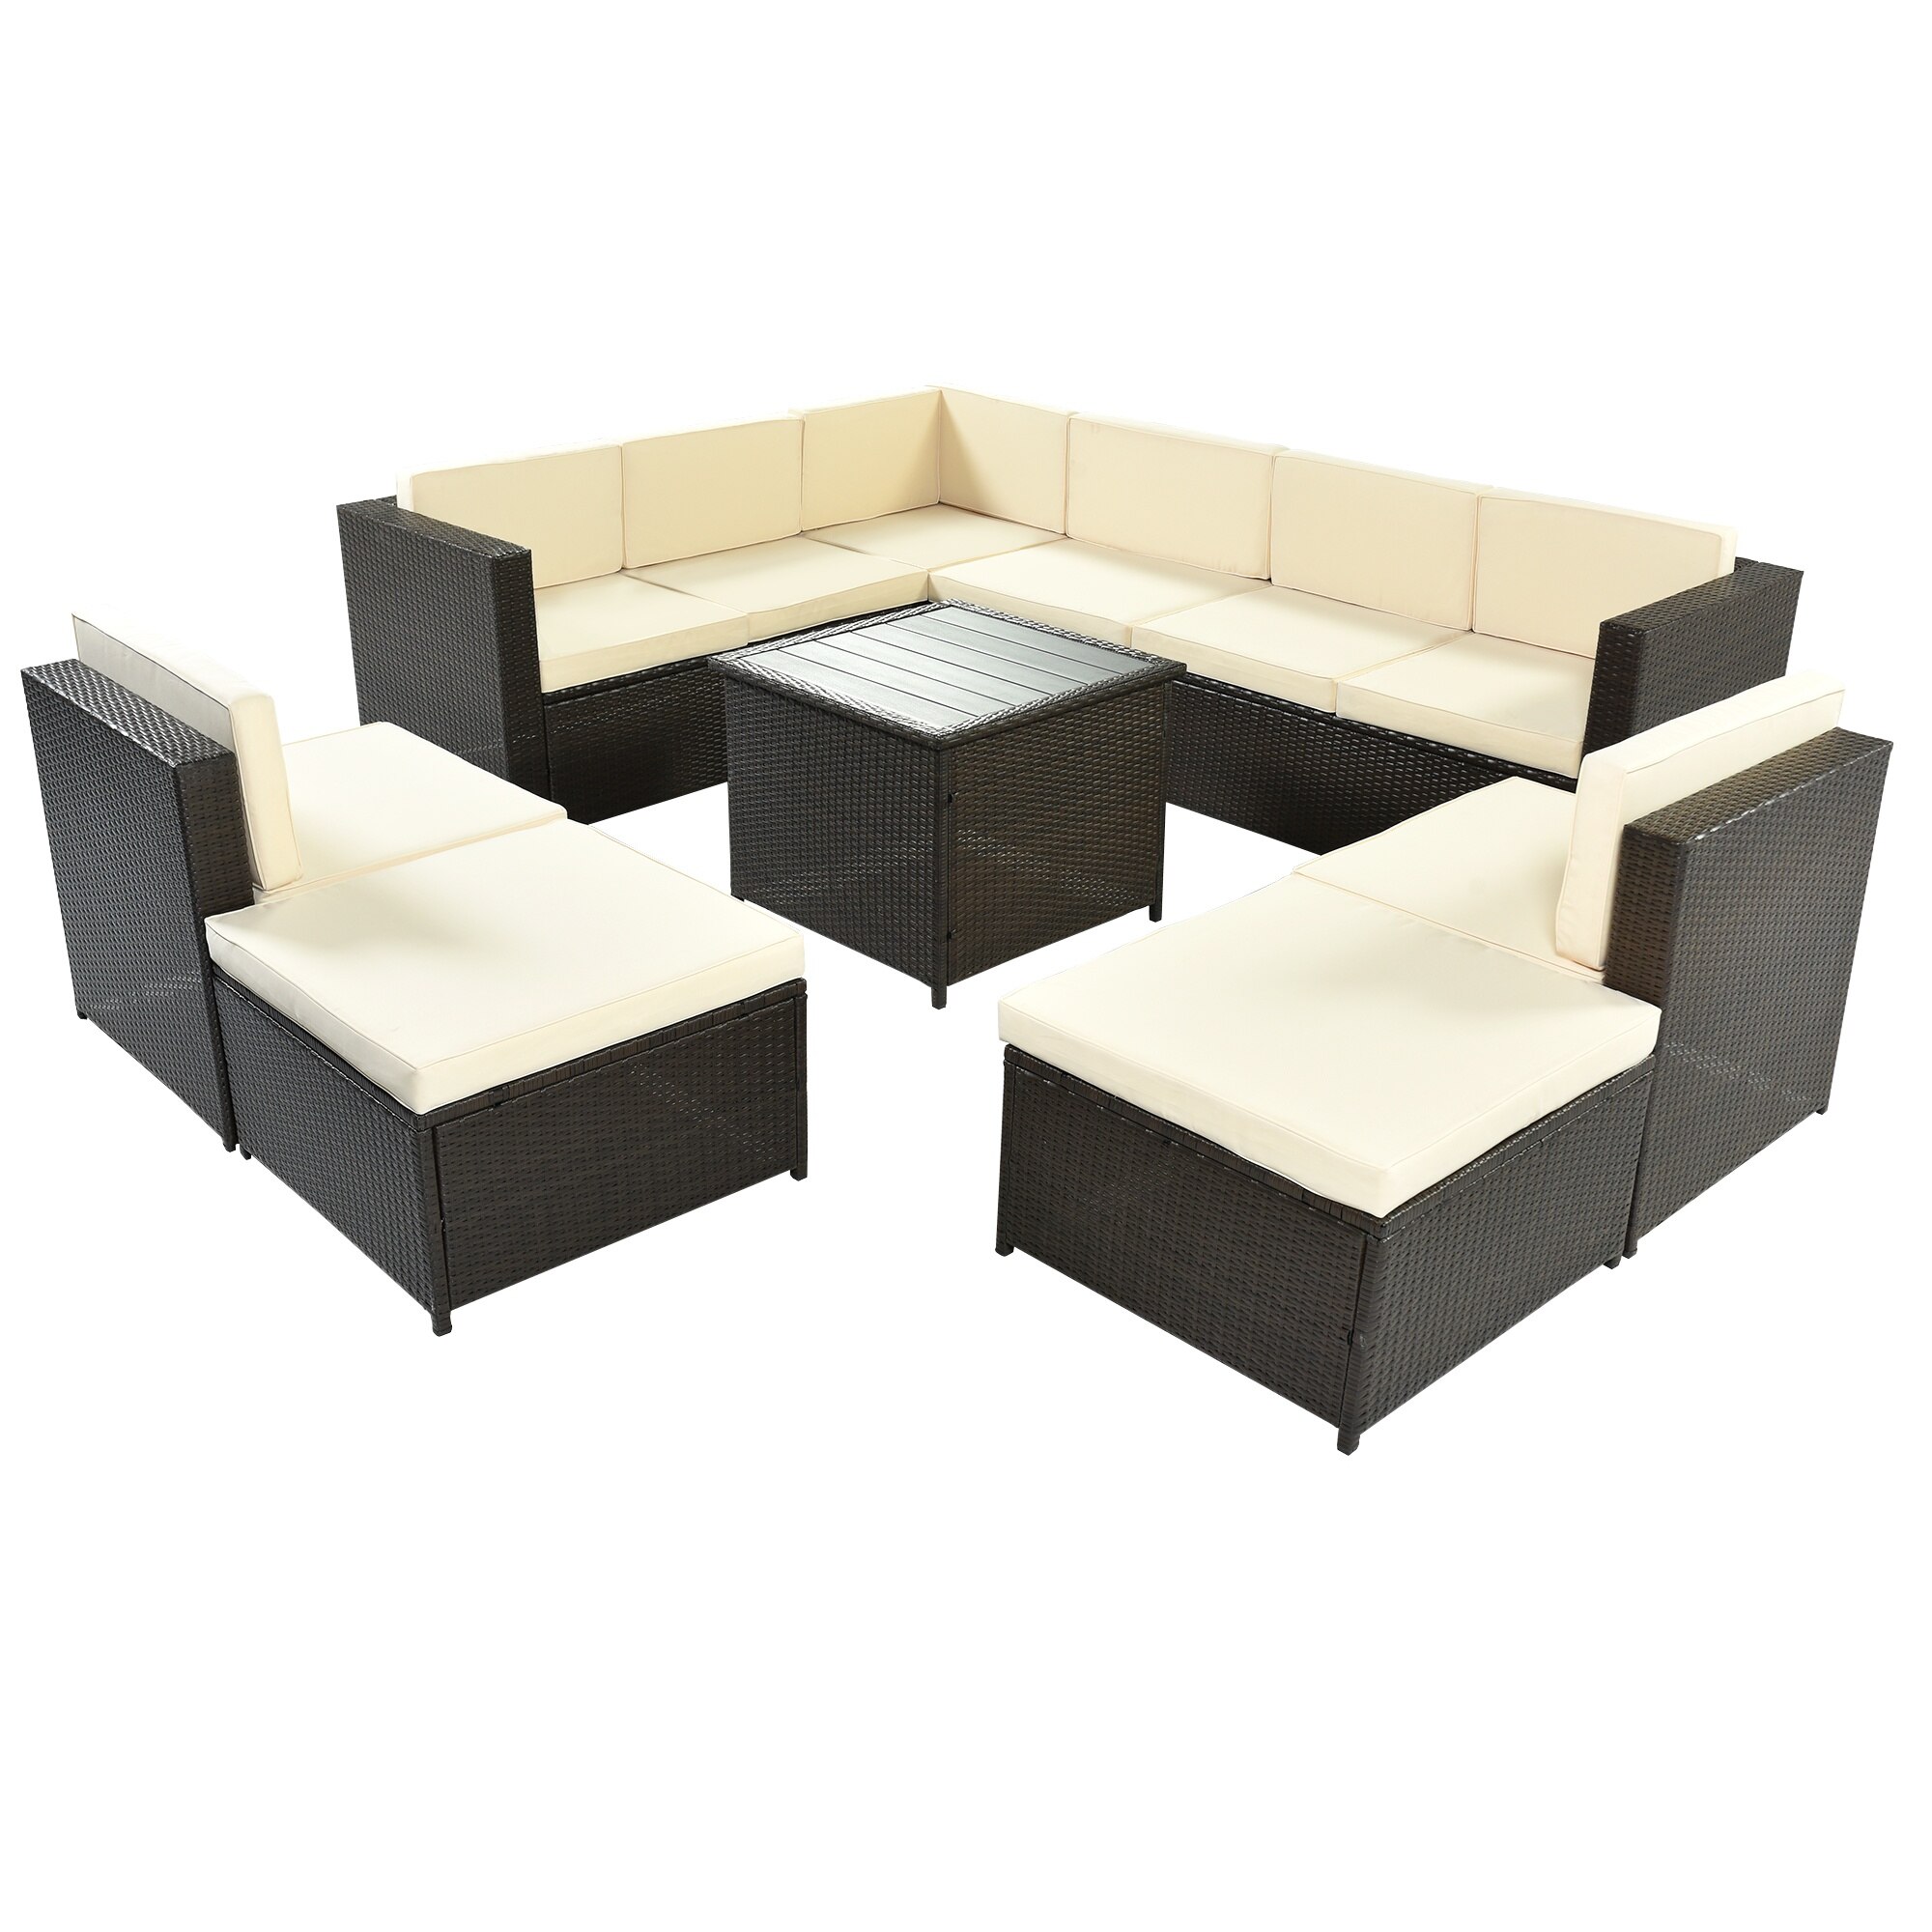 9 Piece Rattan Sectional Seating Group With Cushions And Ottoman Patio Furniture Sets Outdoor Wicker Sectional Garden Sofas 4